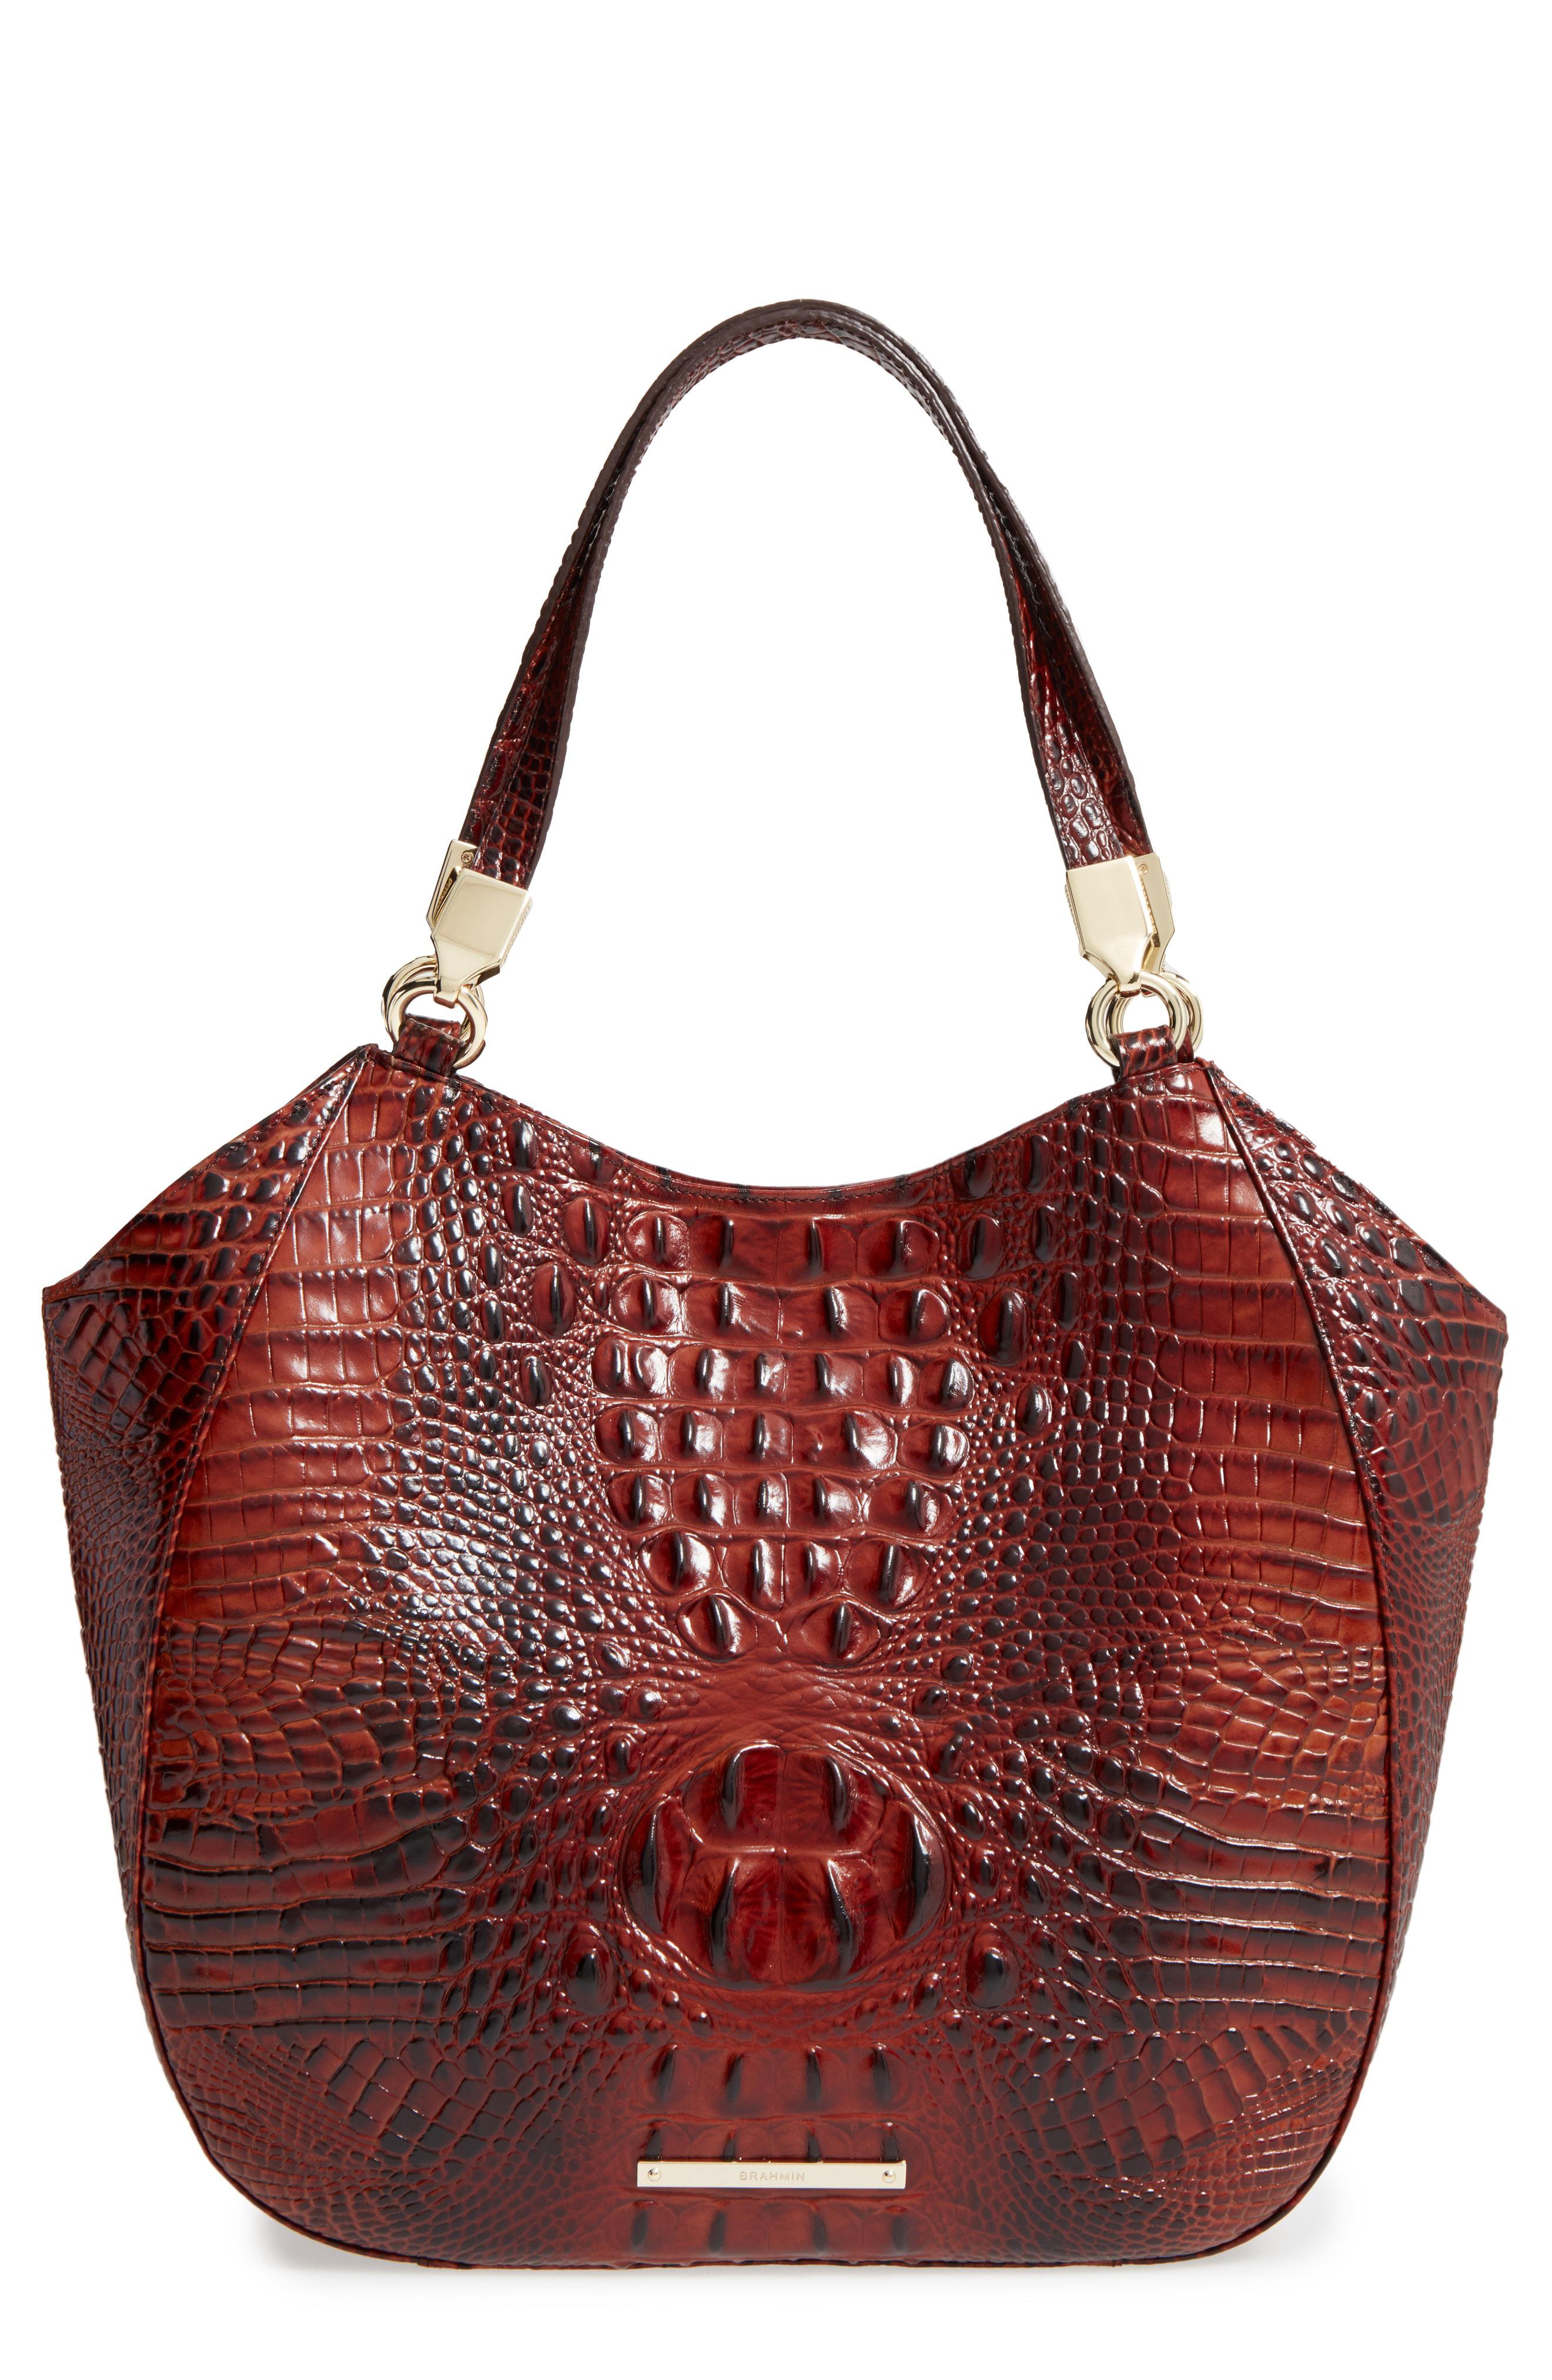 Lyst - Brahmin Melbourne Marianna Leather Tote in Red